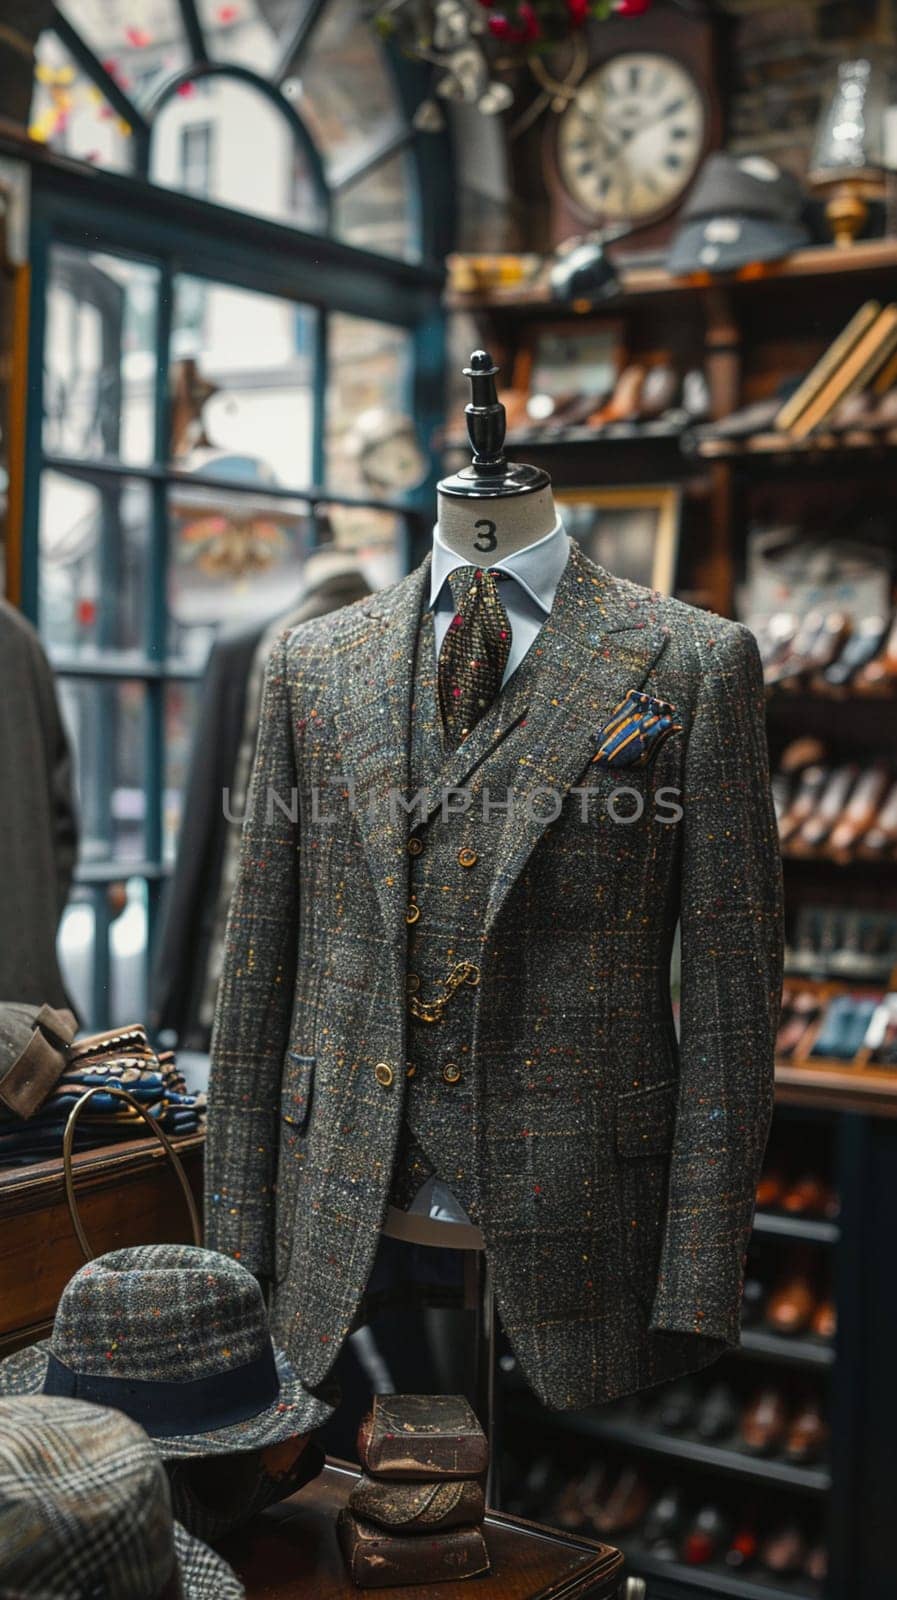 Bespoke Tailoring Atelier Crafts Signature Looks in Business of Personalized Fashion, Tailor's chalk and bespoke suits craft a story of signature looks and personalized fashion in the bespoke tailoring atelier business.